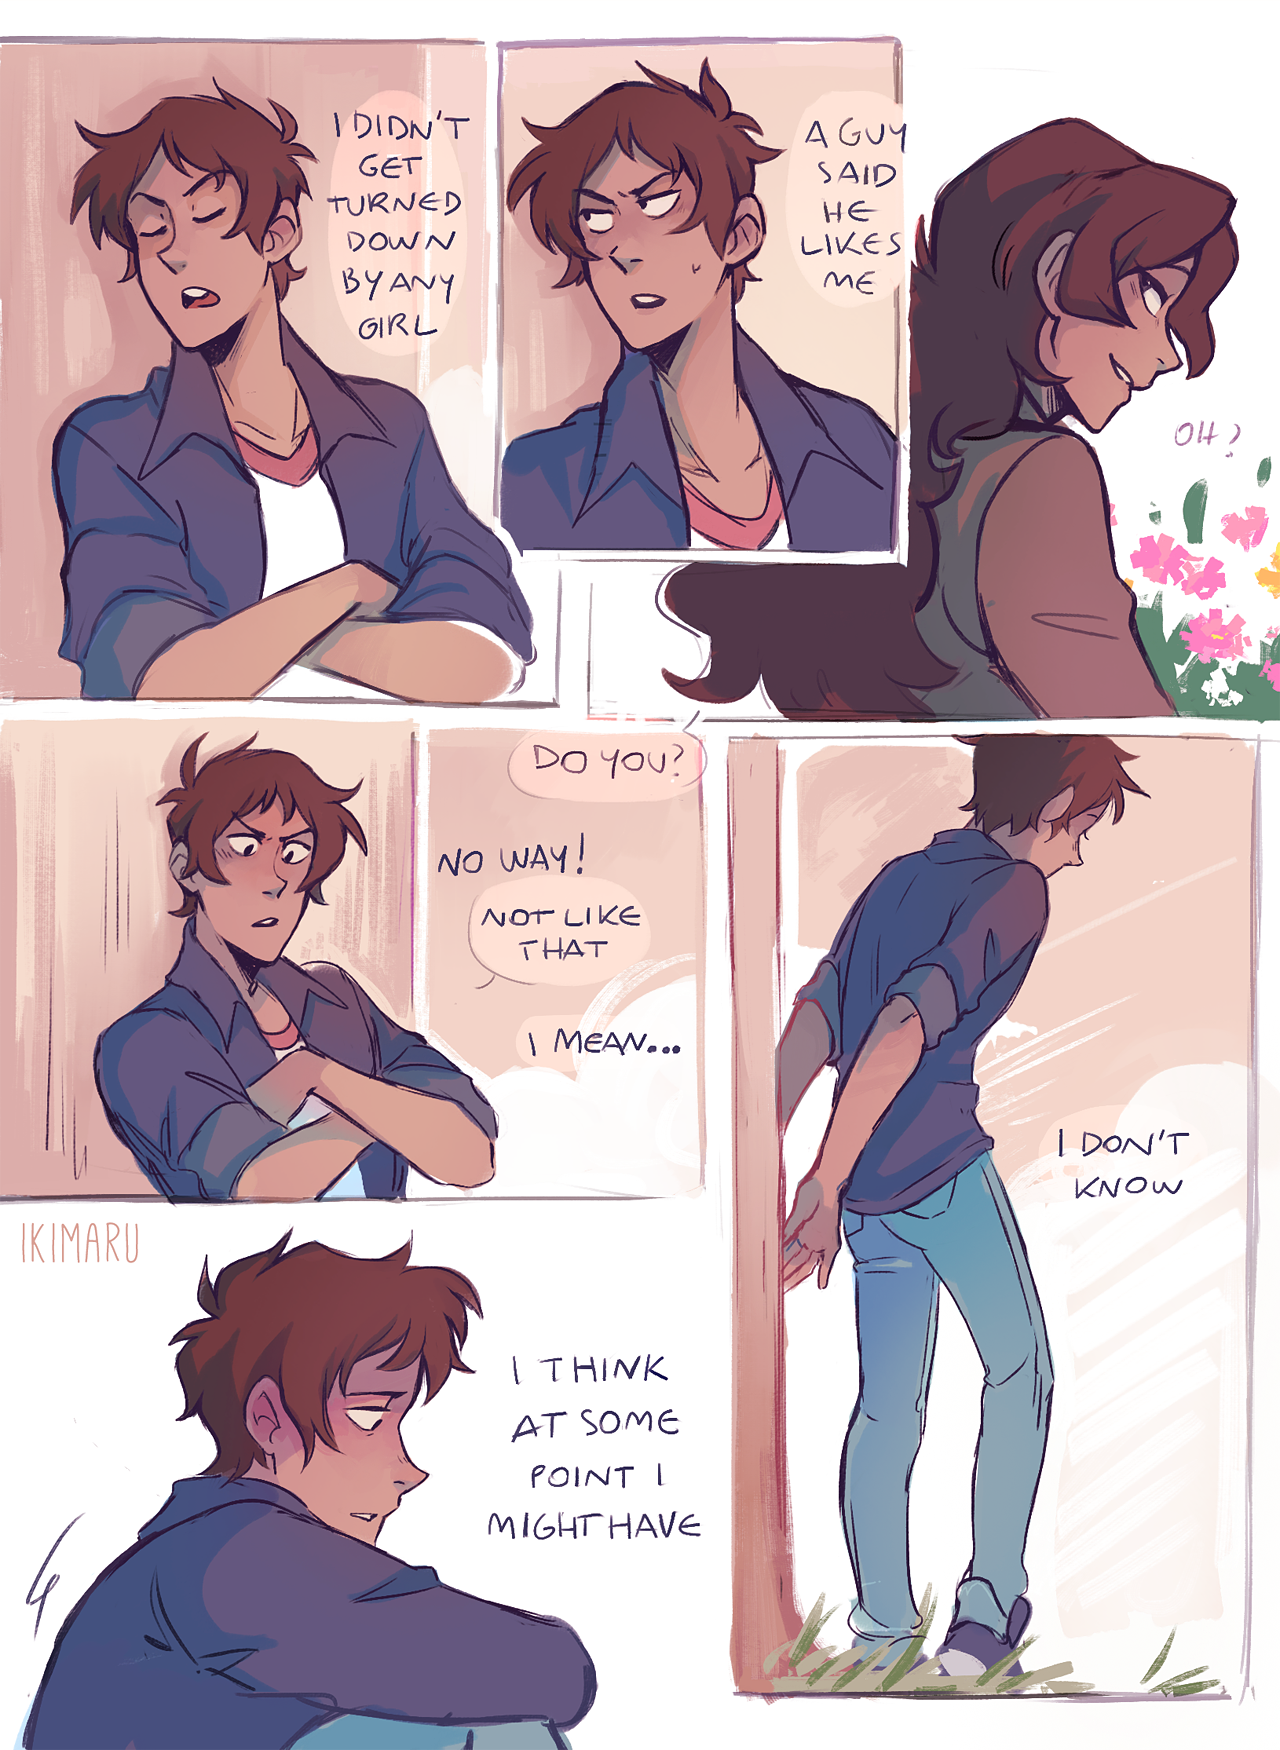 part 5 in which Lance is still thinking about it and Rachel has no time for that(she’s